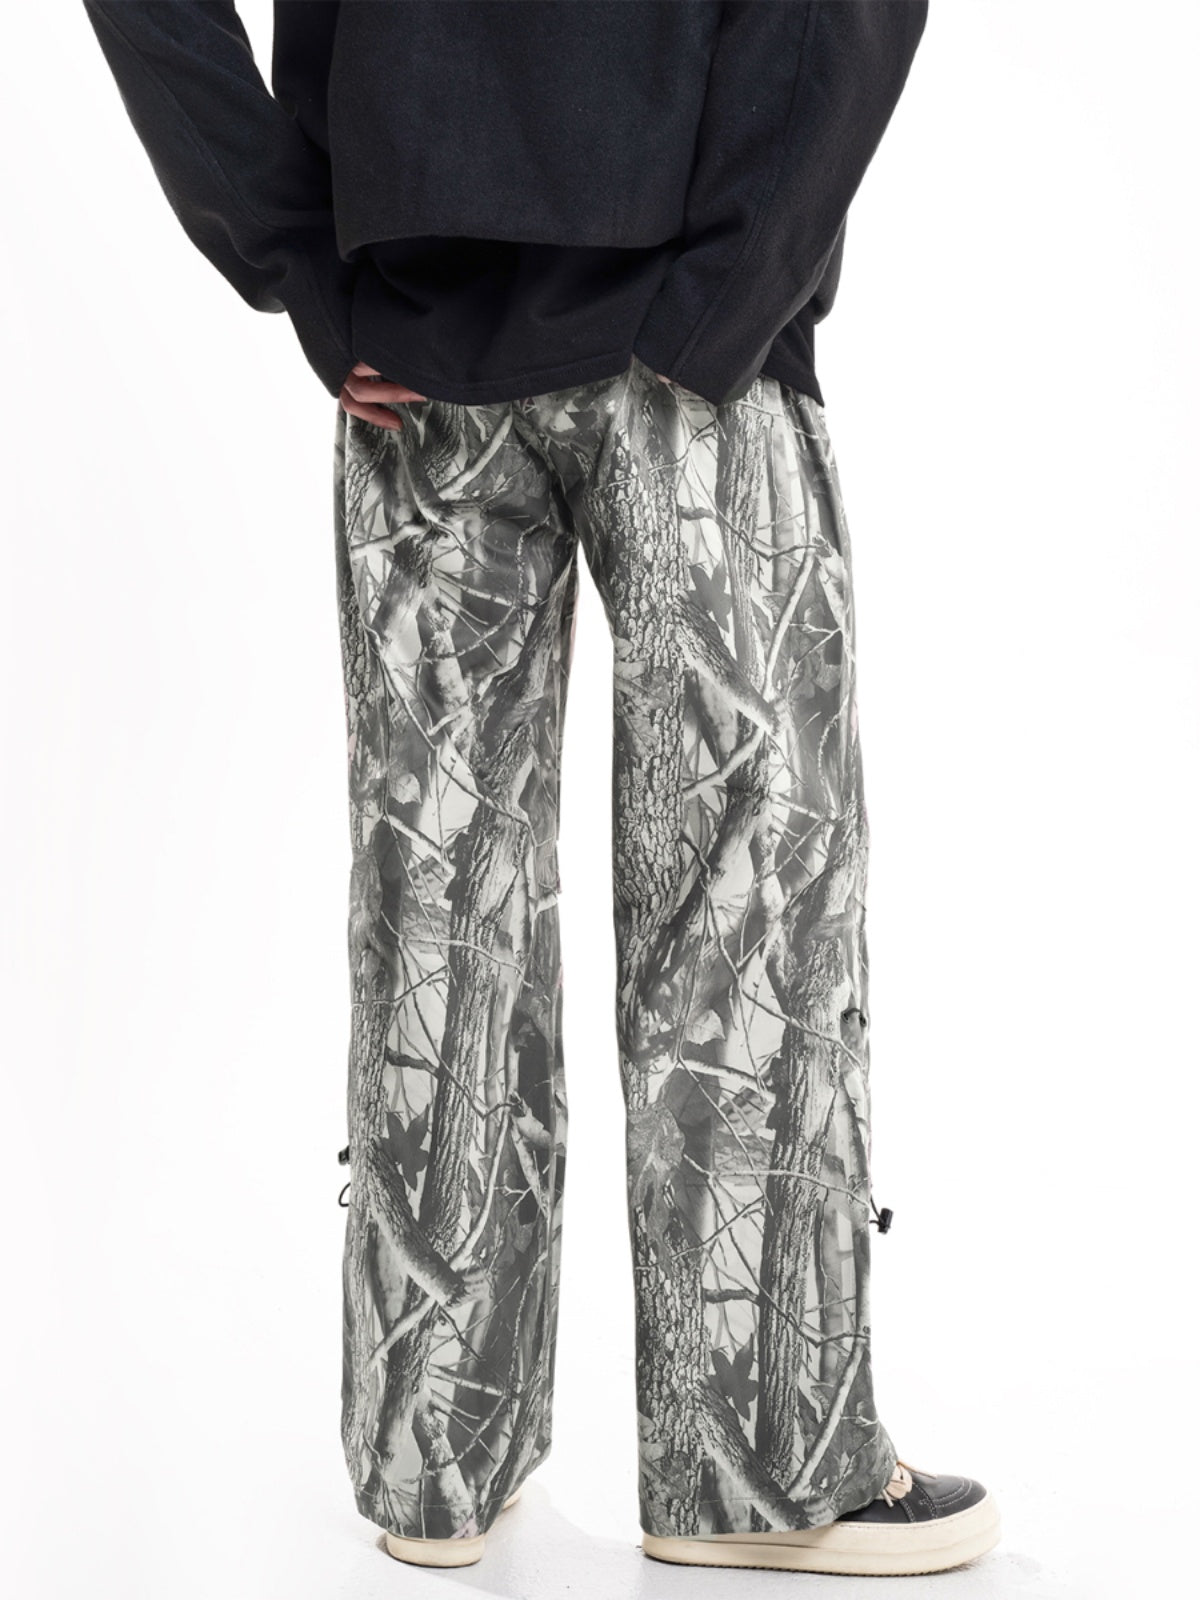 F3F Select Drawstring Leaves Camouflage Work Pants